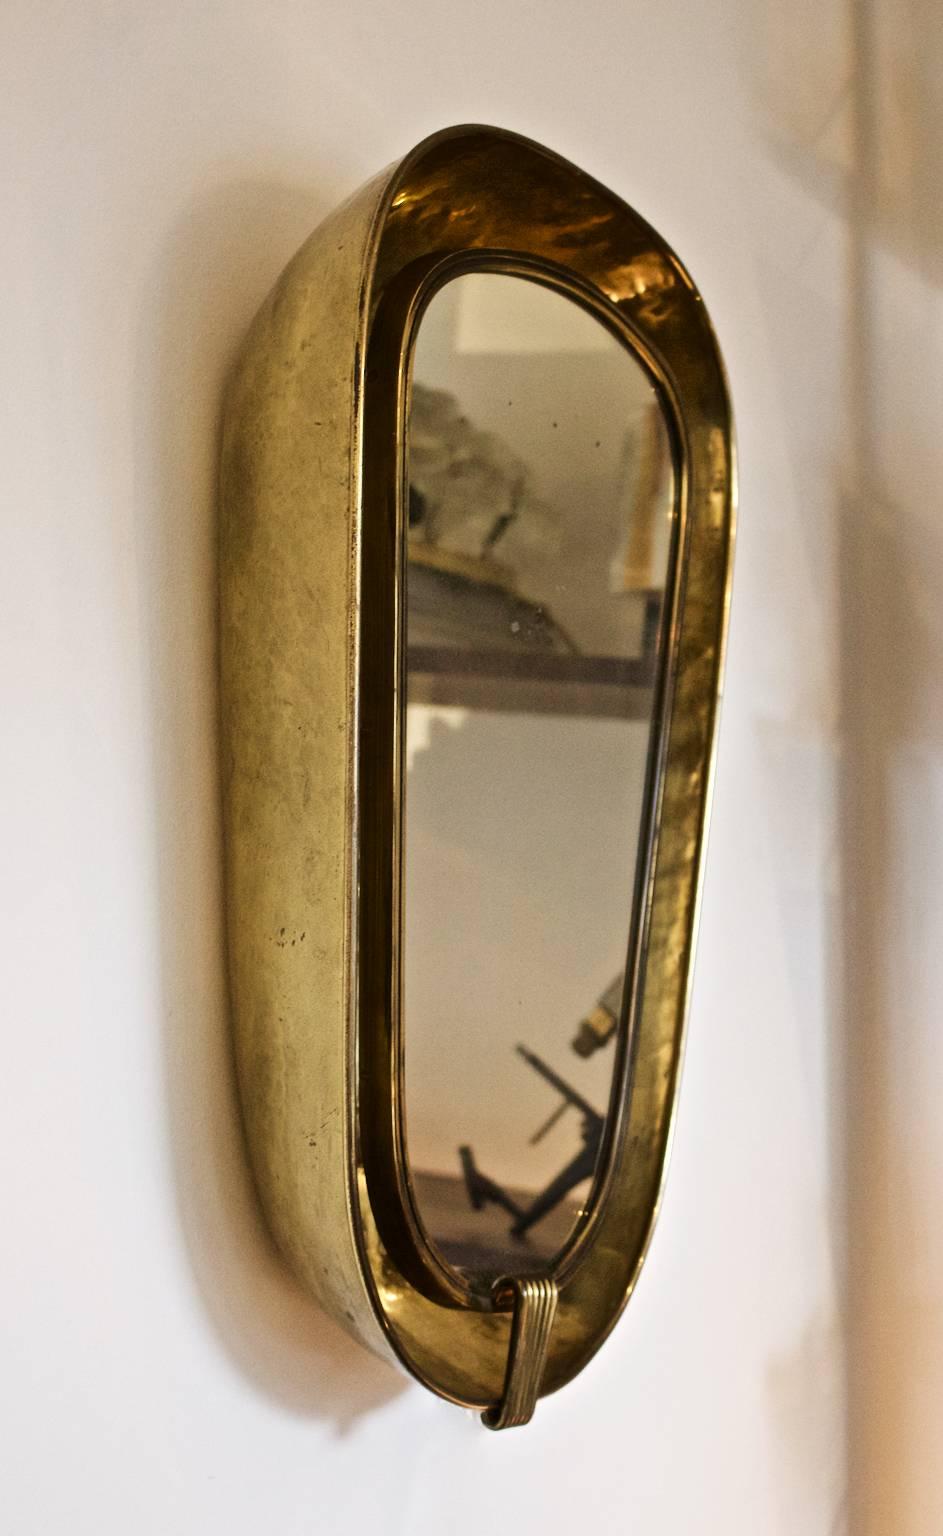 An Art Deco back-lit wall mirror with deep brass frame. European early to mid-20th century.

The brass-framed mirror sits in the centre of a hammered brass bowl and conceals a simple lighting fixture which provides indirect light. The piece is in